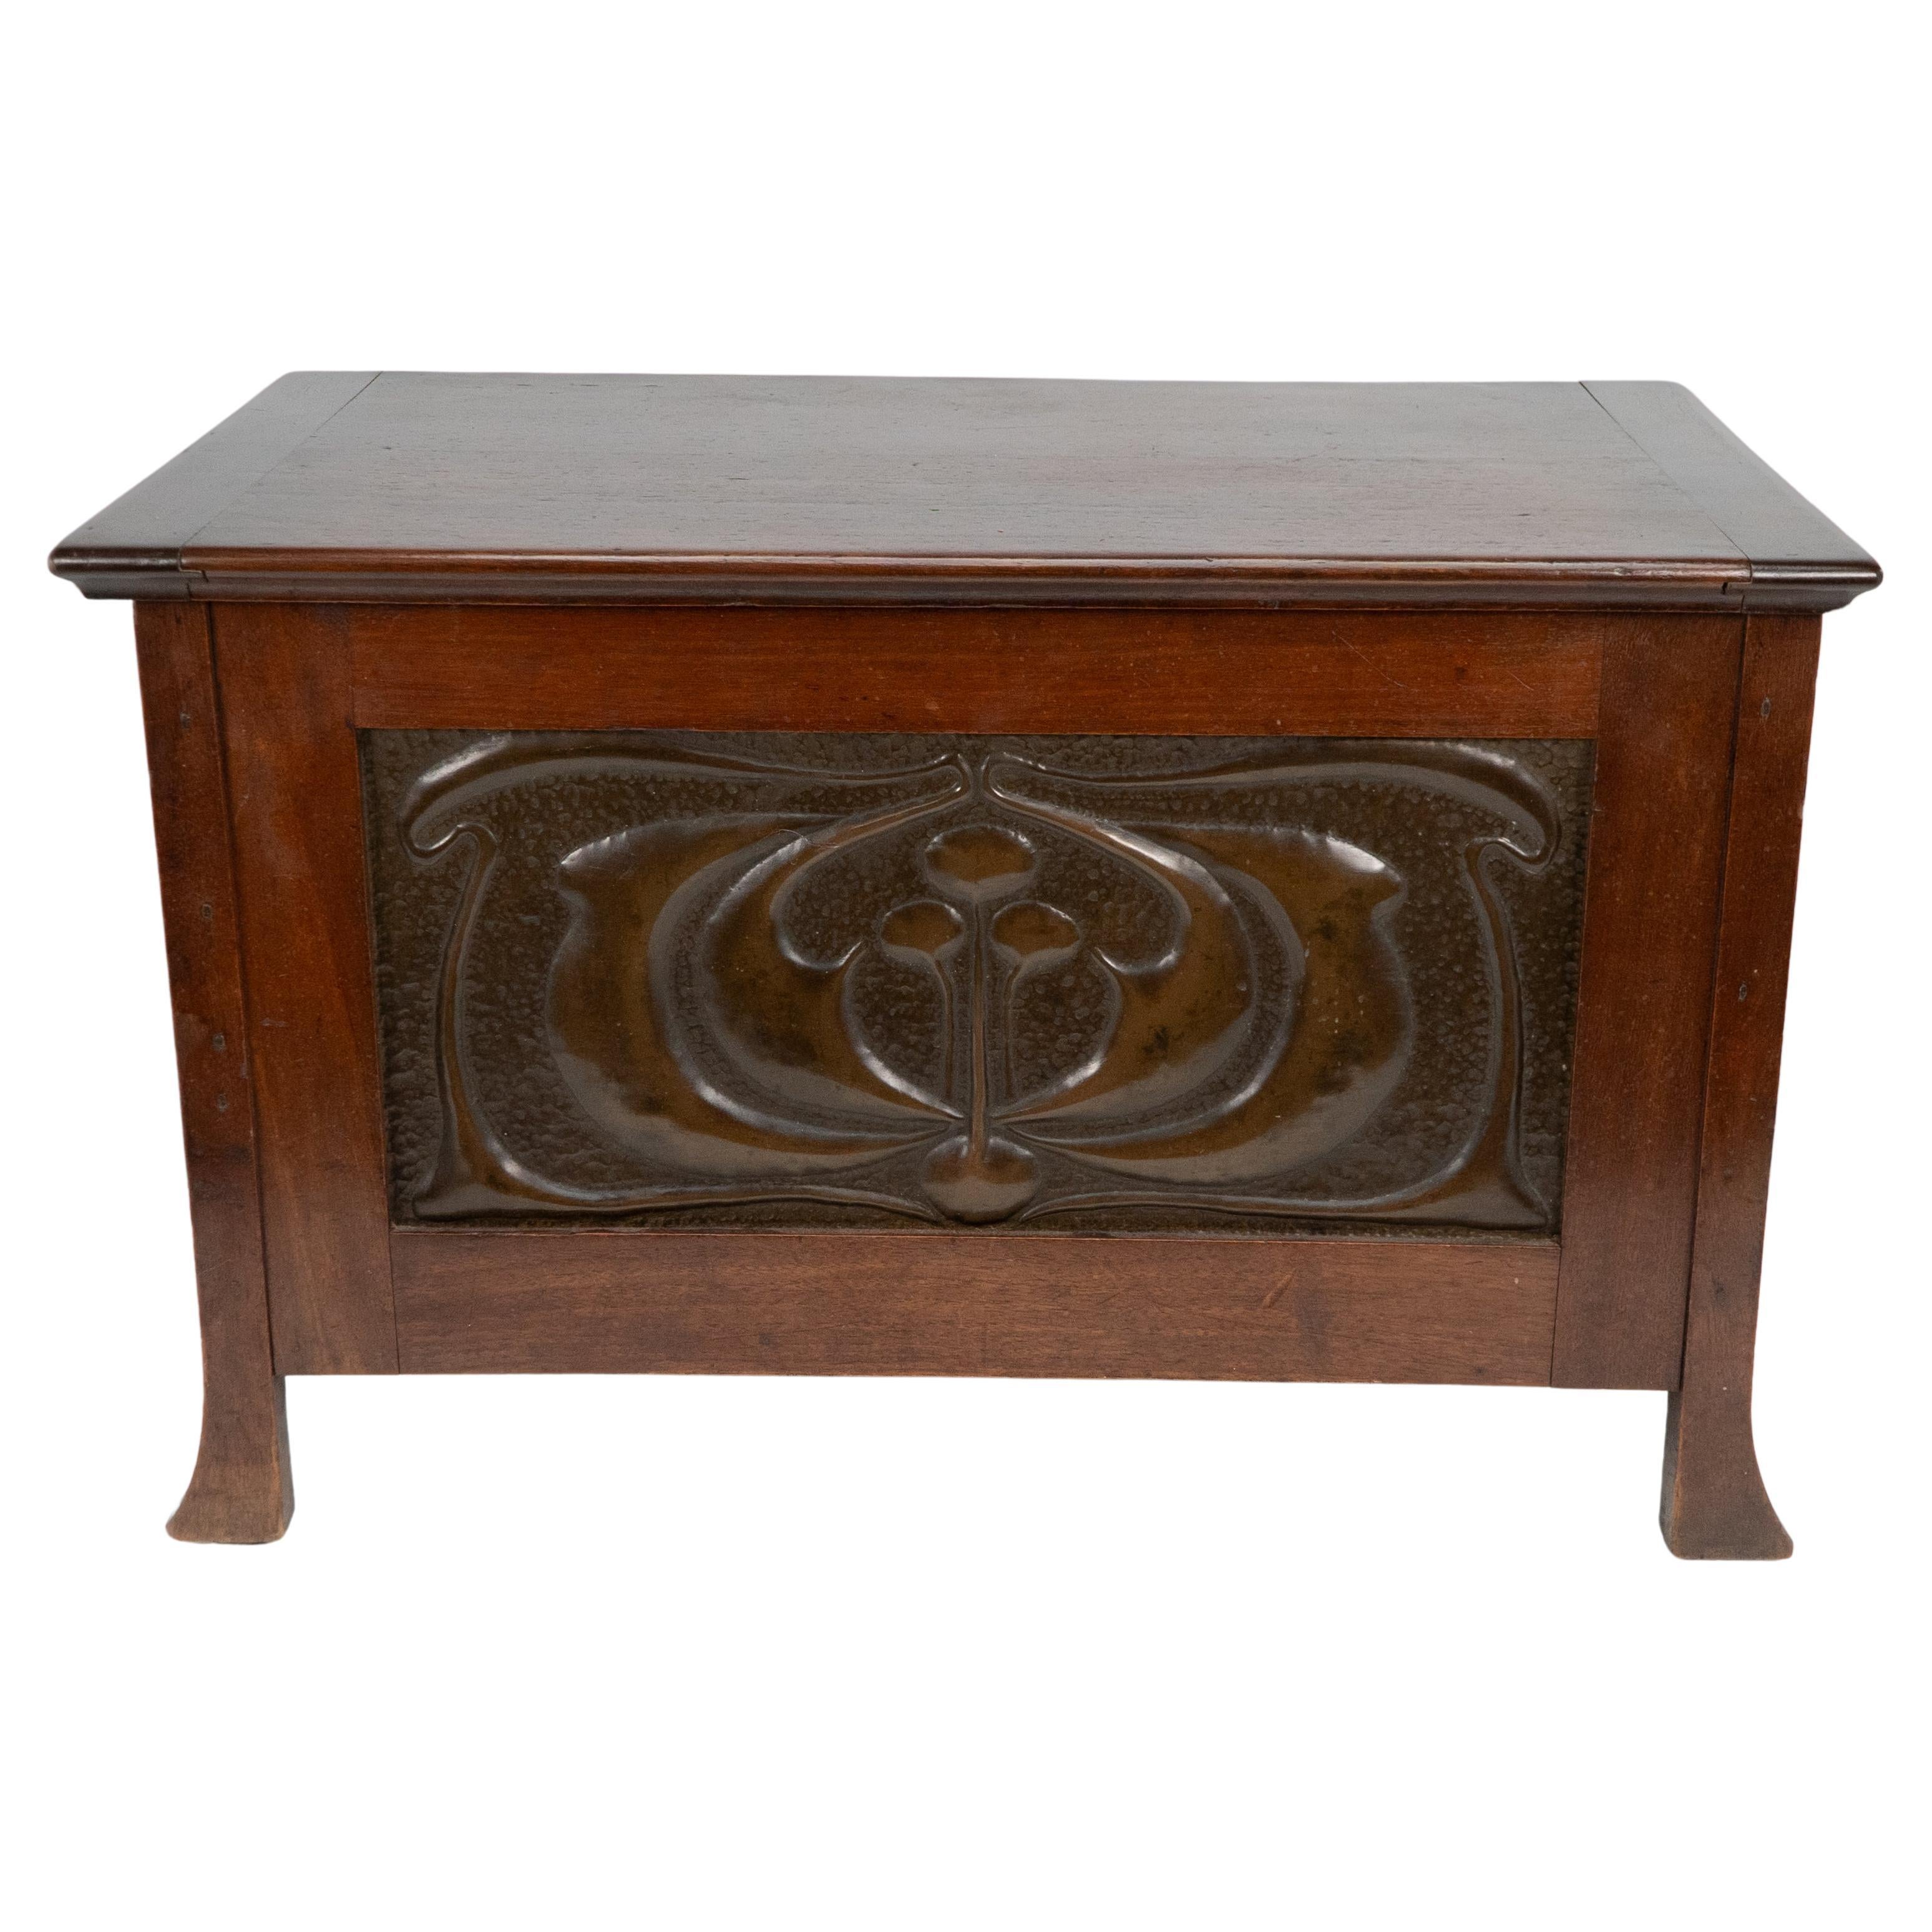 Liberty and Co. A small trunk with copper panels in the style of C R Mackintosh. For Sale